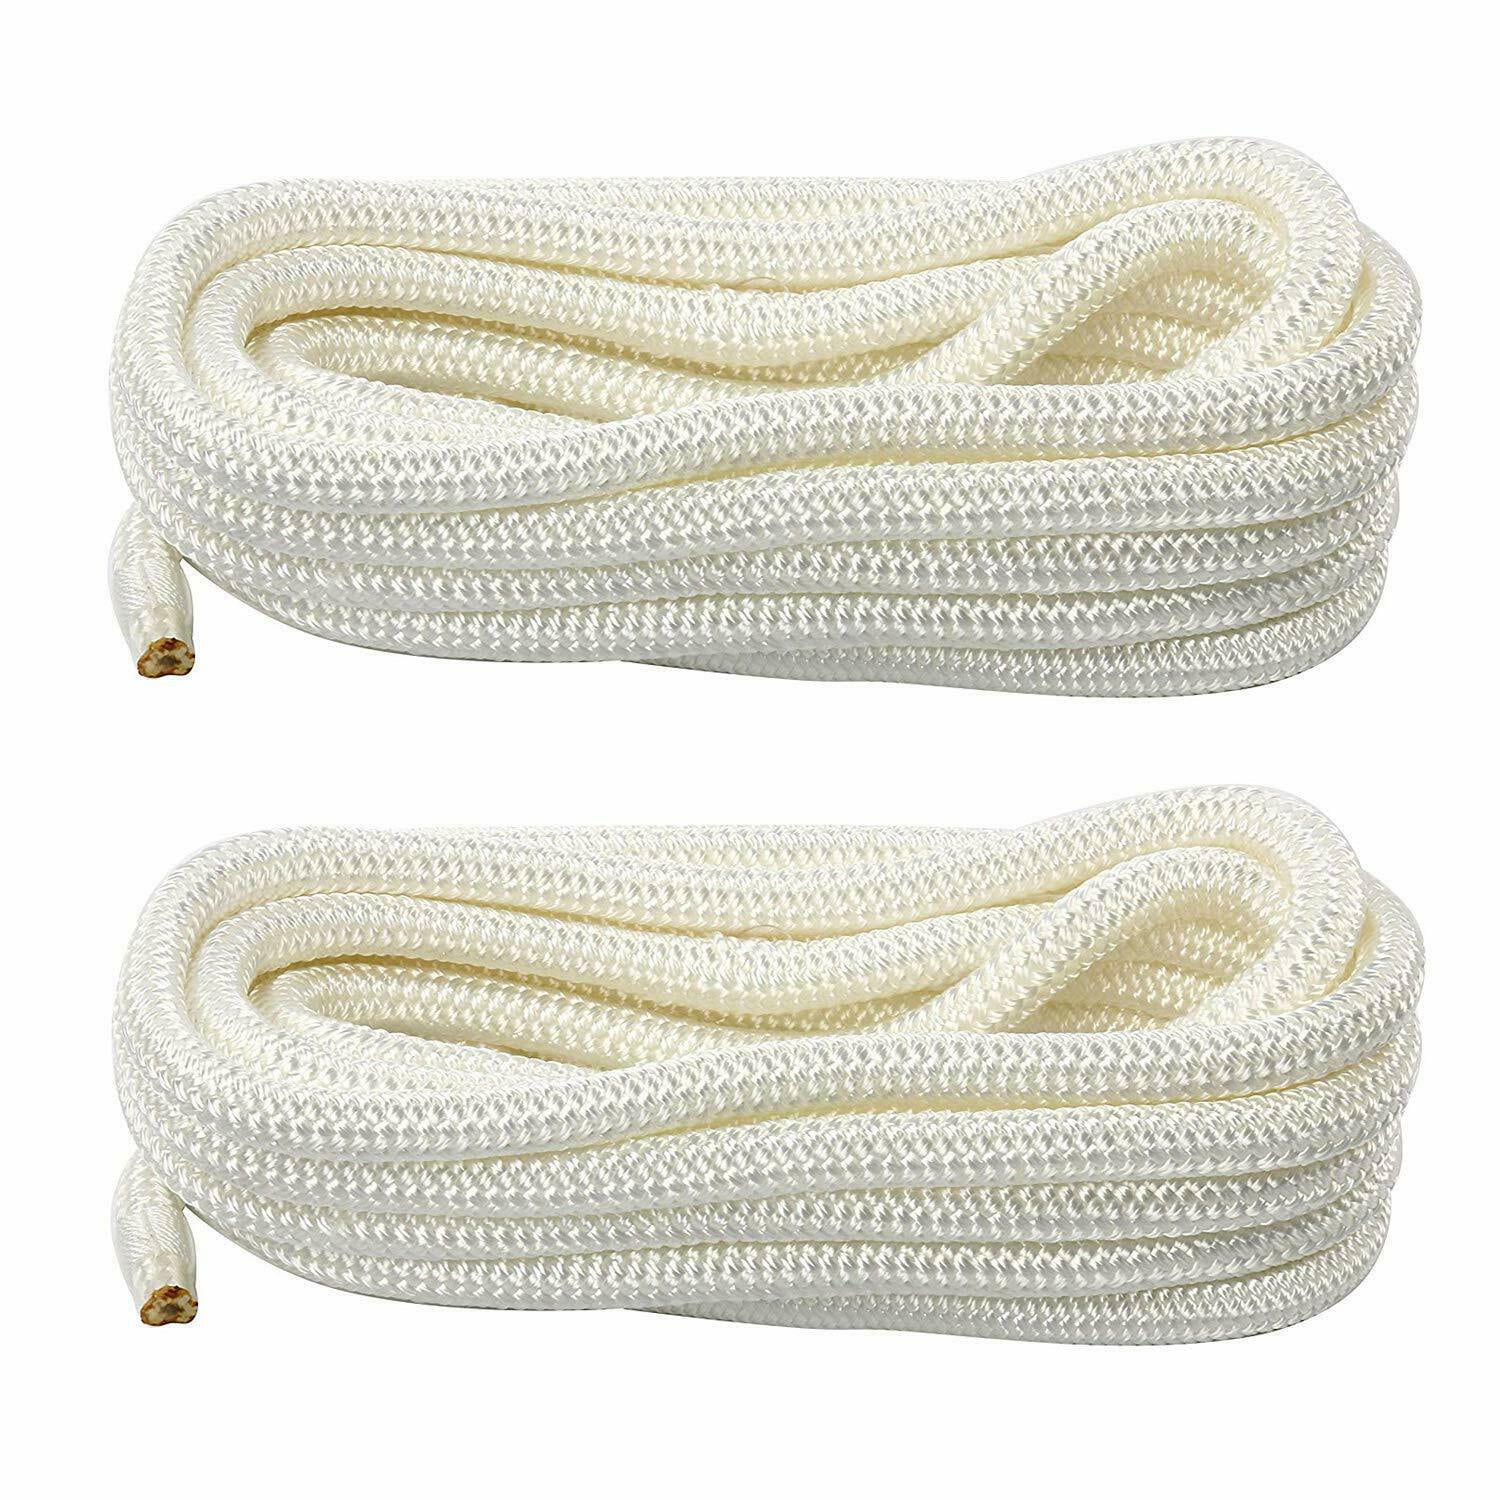 2 Pack of 5/8 Inch x 35 Ft White Double Braid Nylon Mooring and Docking Lines